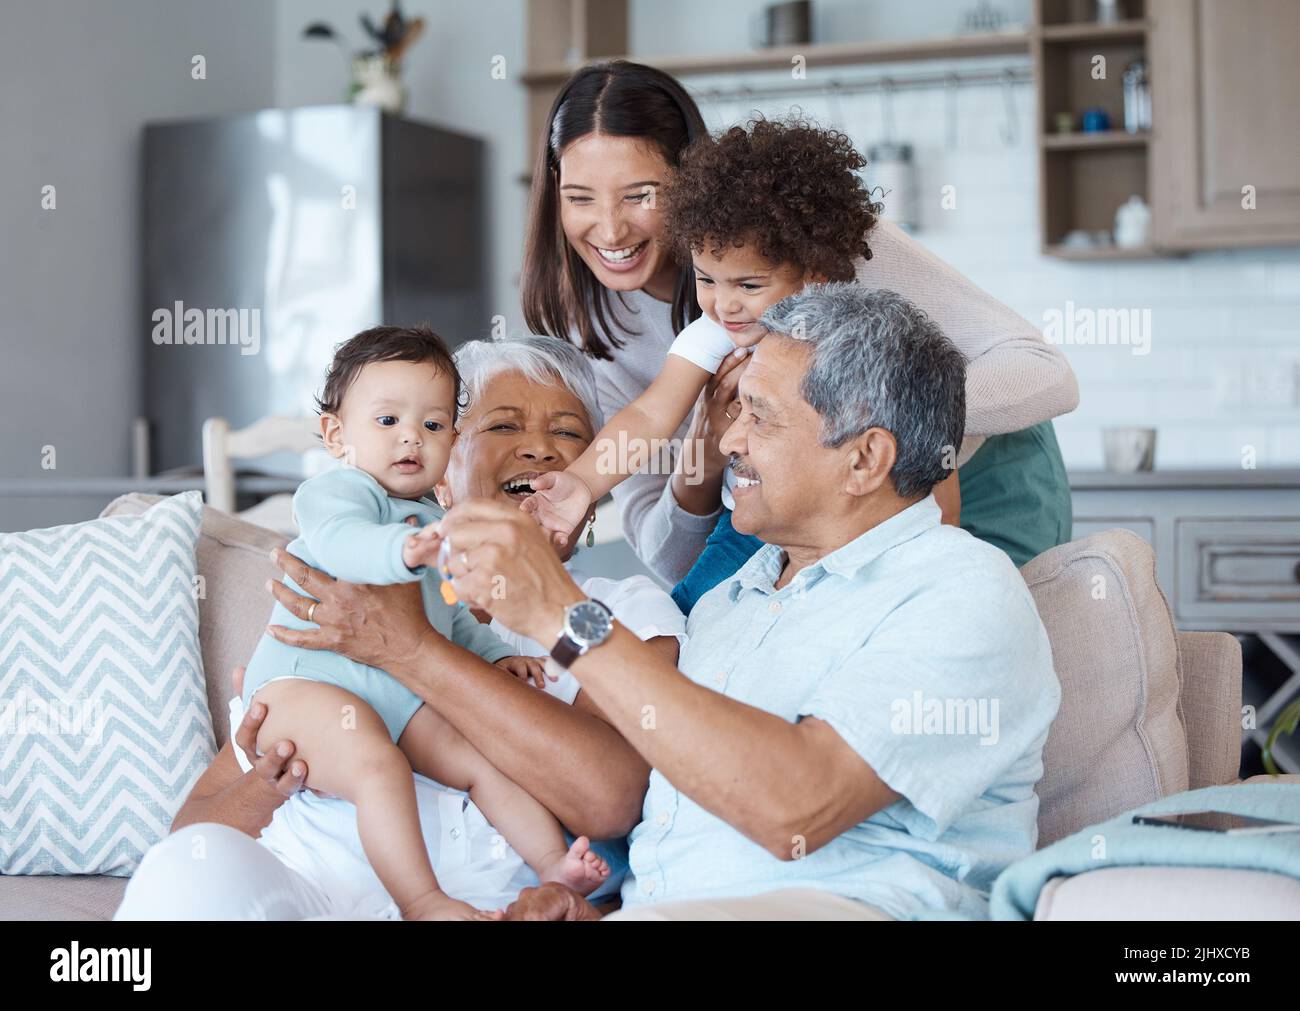 These bonds are shackle-free. a beautiful family bonding on a sofa at home. Stock Photo